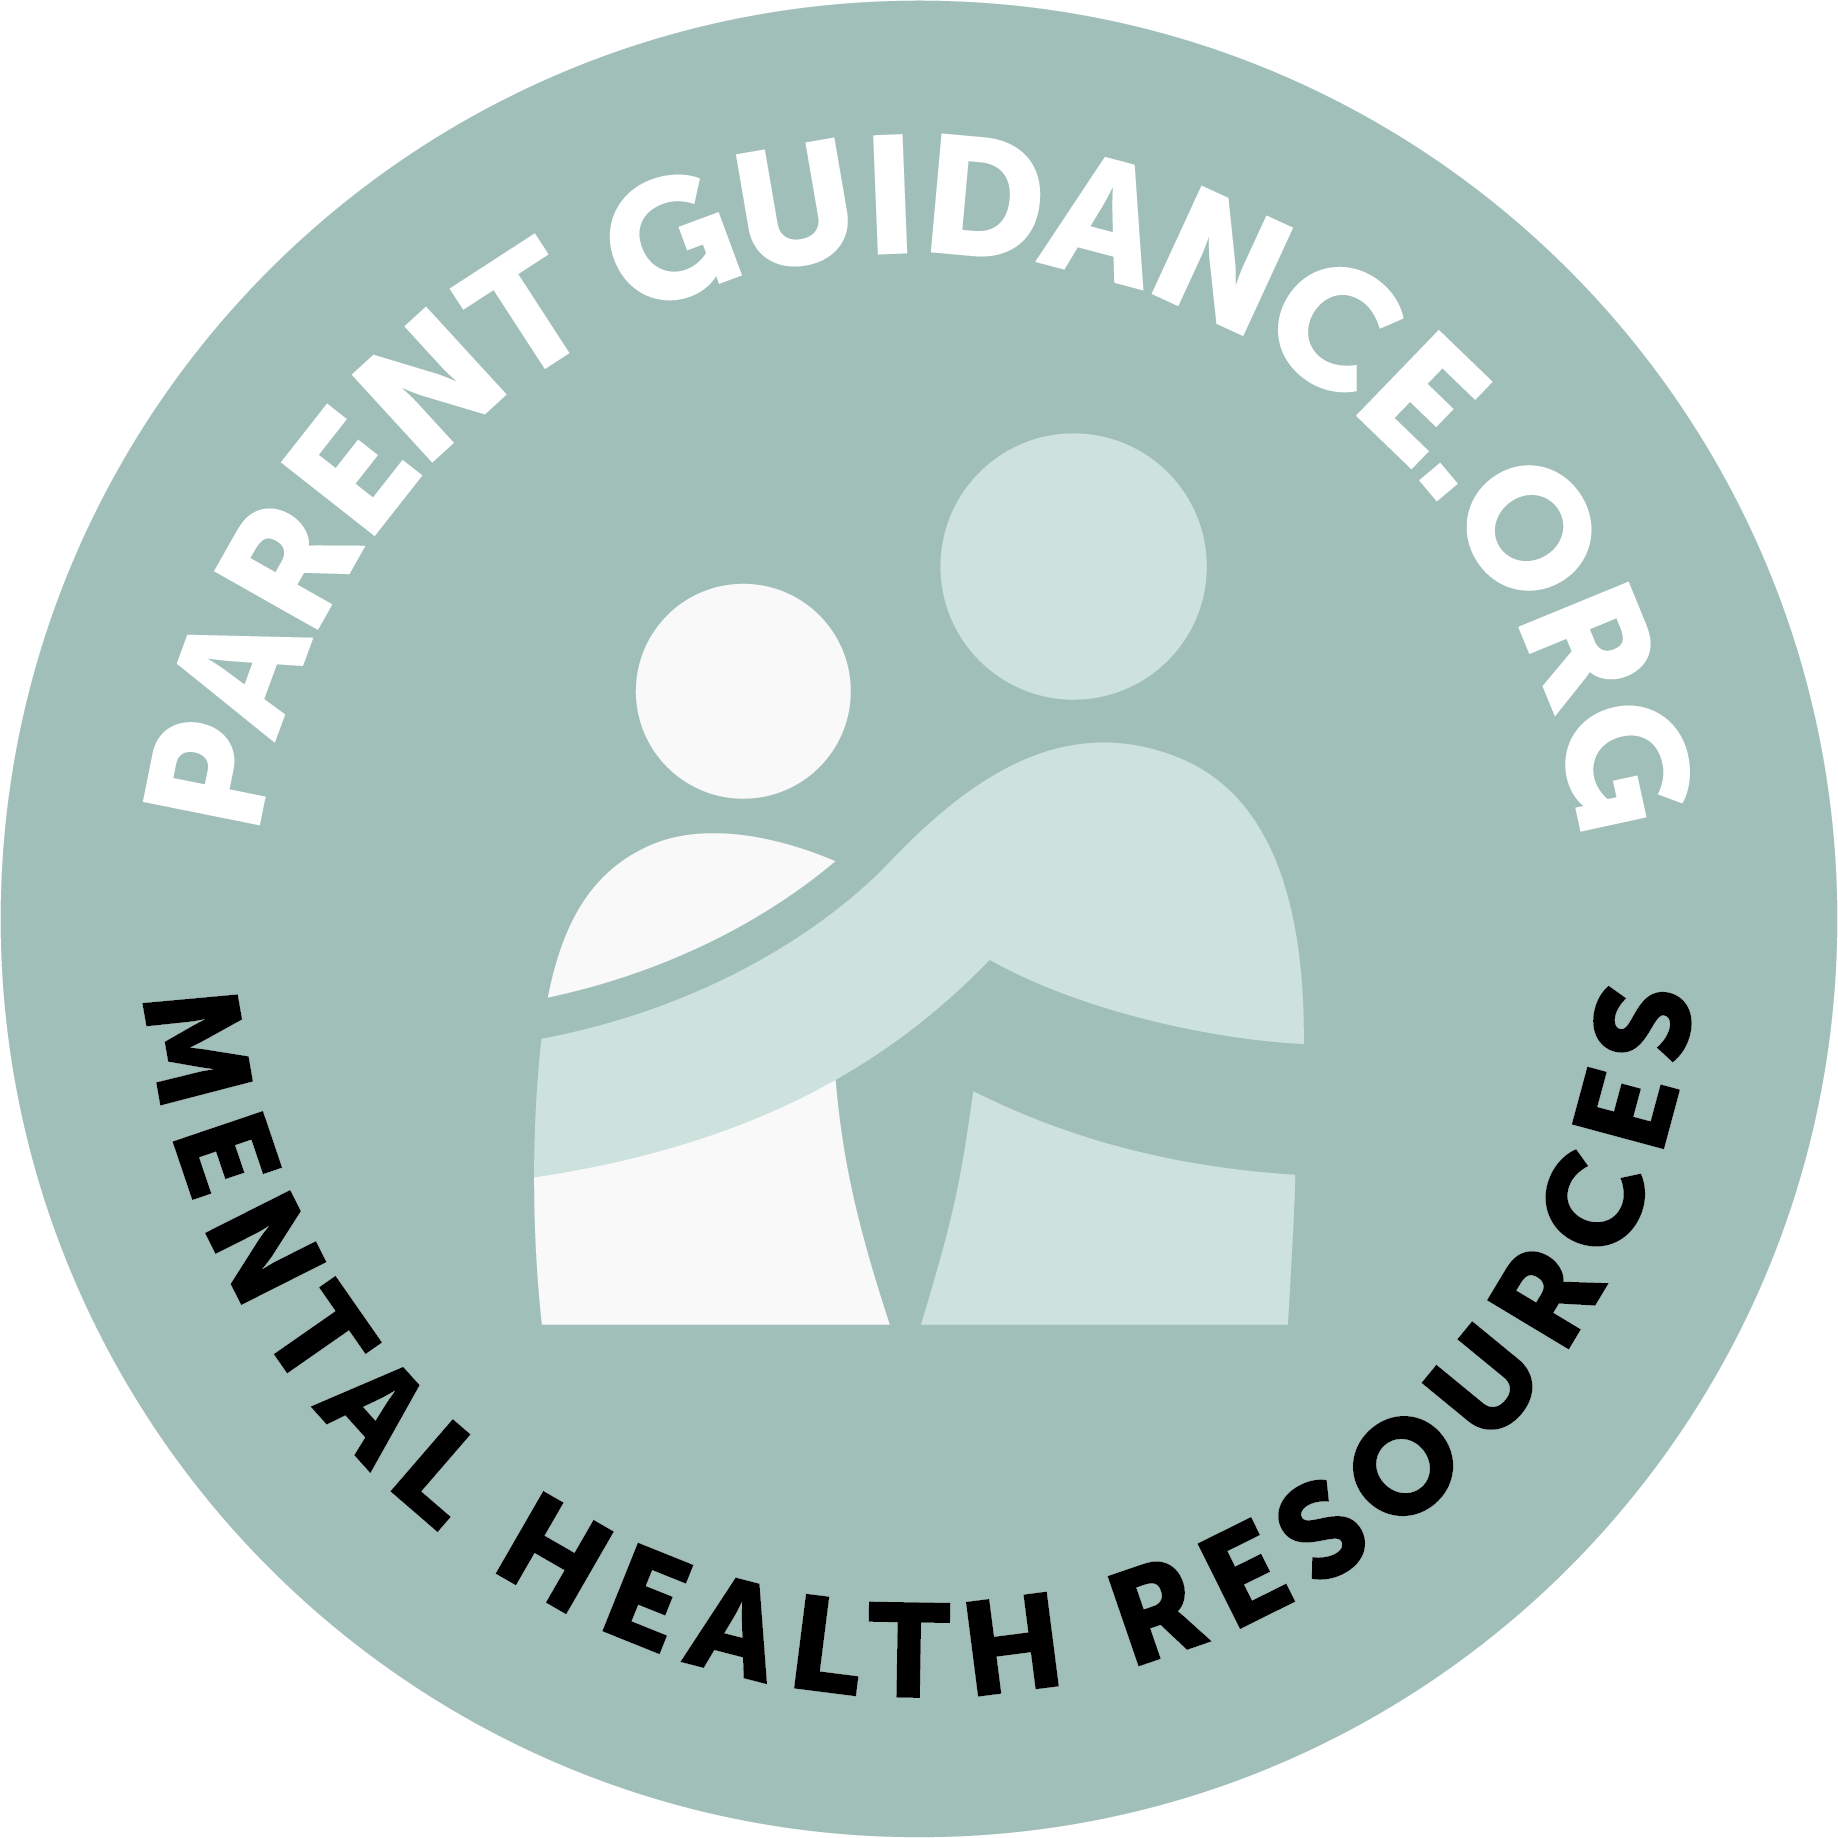 Parent Guidance.org Mental Health Resources